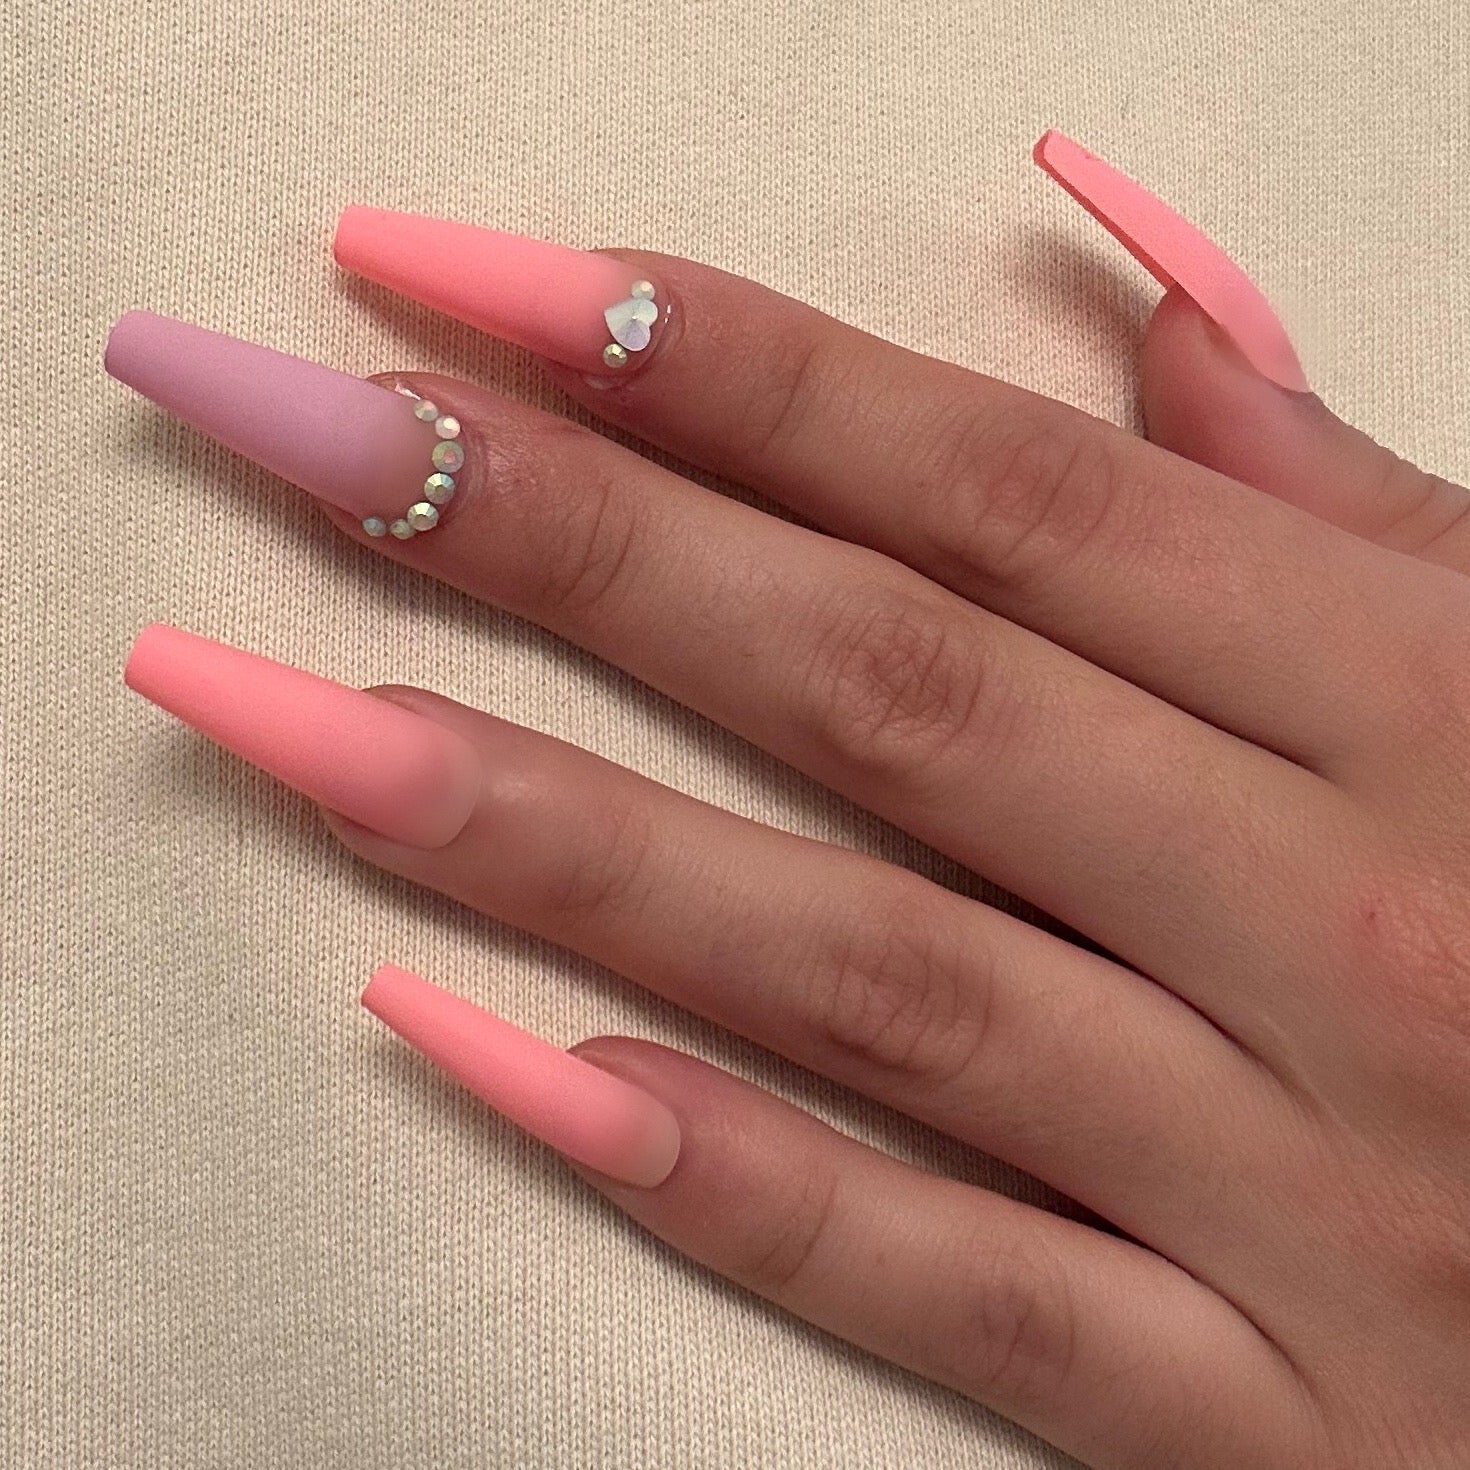 PINK GRADIENT Swatch: Extra Long Pink Press On Nails | Lavaa Beauty